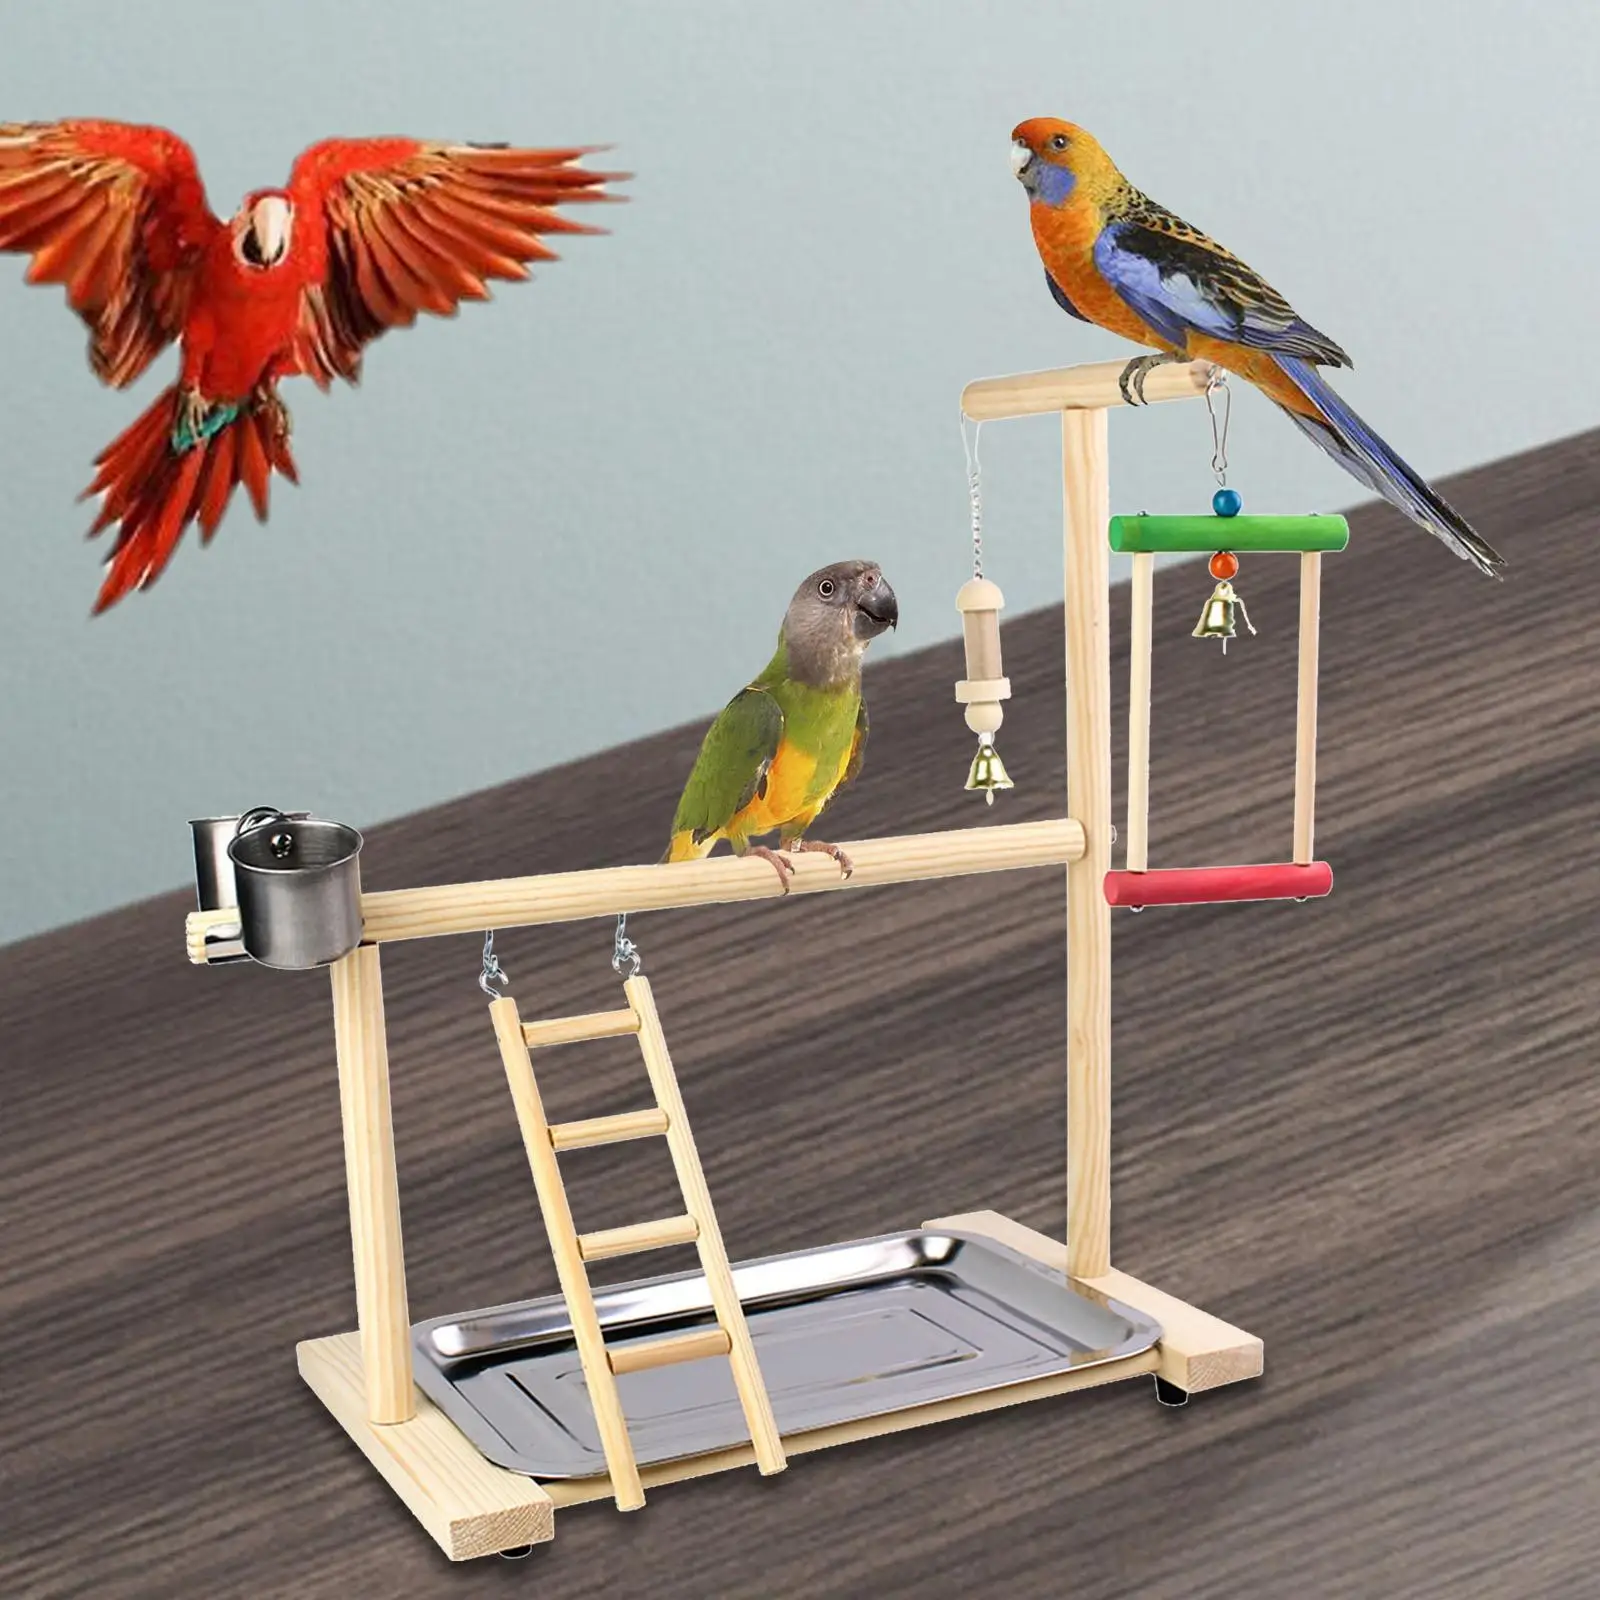 Toys Bird Perch Platform Bird Playground Gym Ladder with Feeder Cups Exercise Bird Gym Toys Wood Pet Parrot Playstand for Budgie